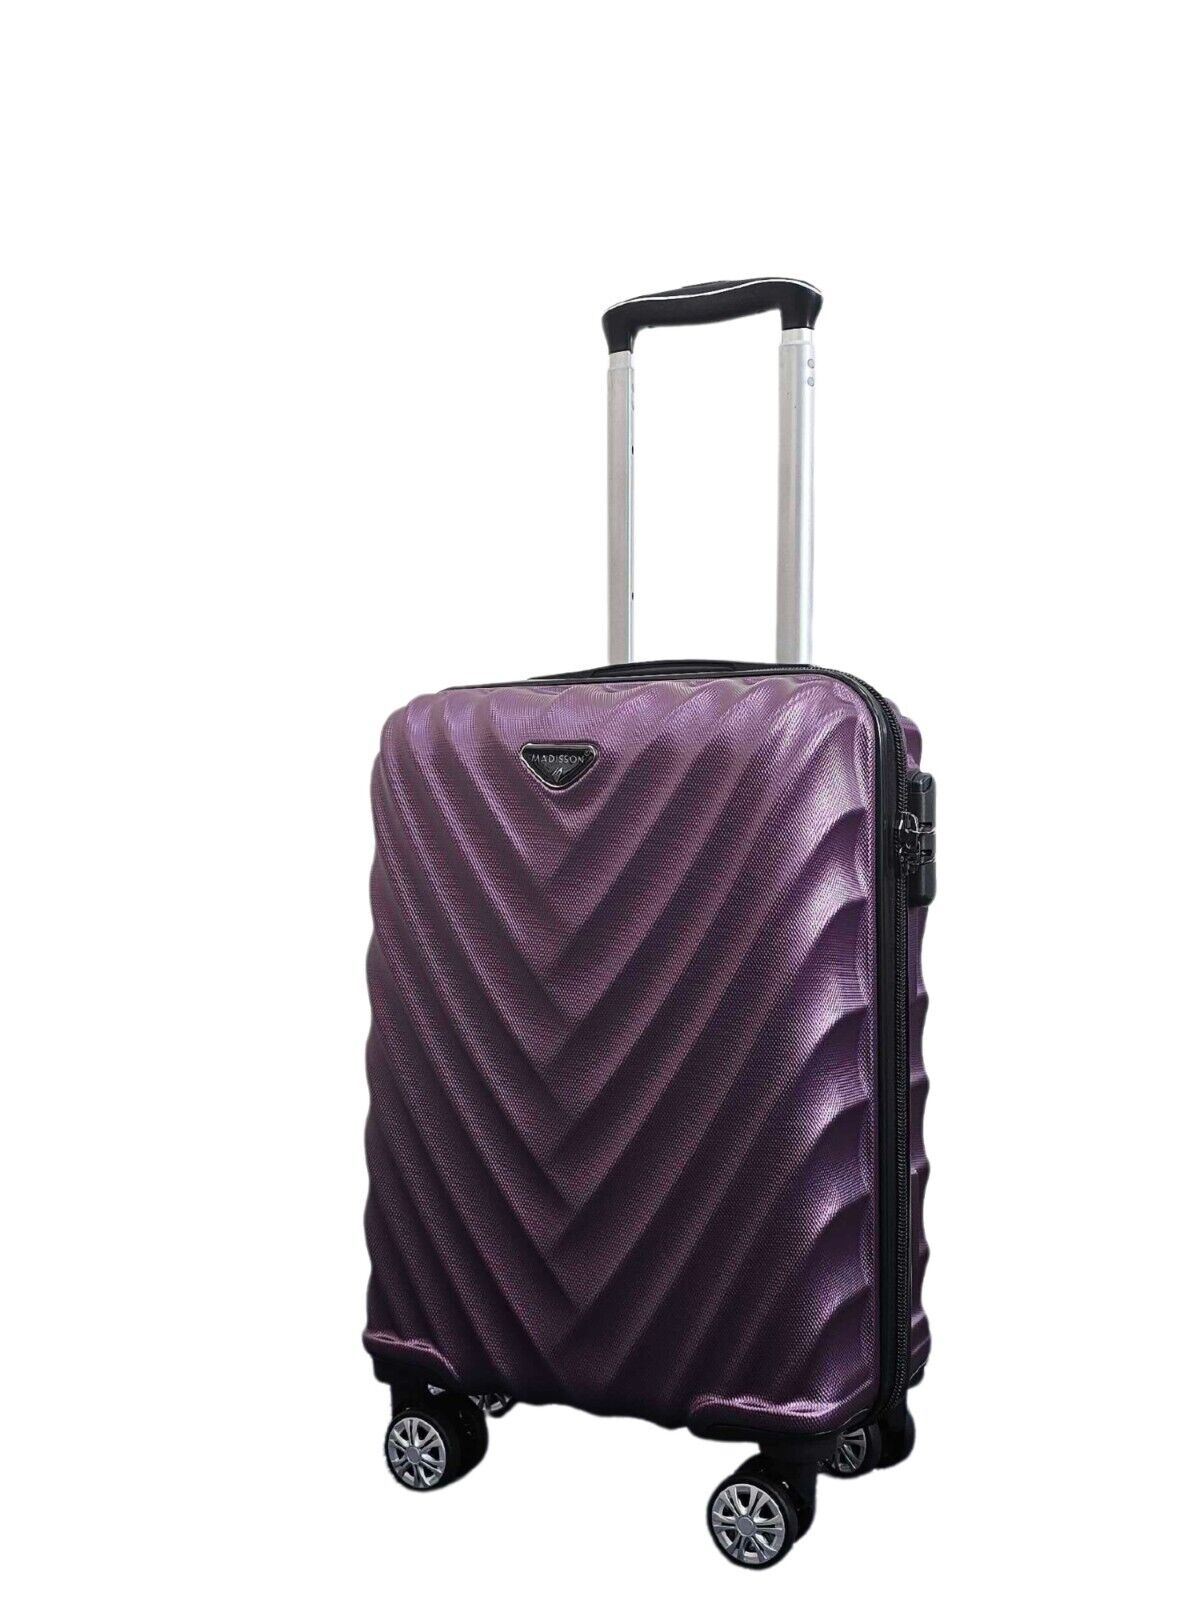 Strong Hard shell Suitcase 4 Wheel ABS Lightweight Cabin Luggage